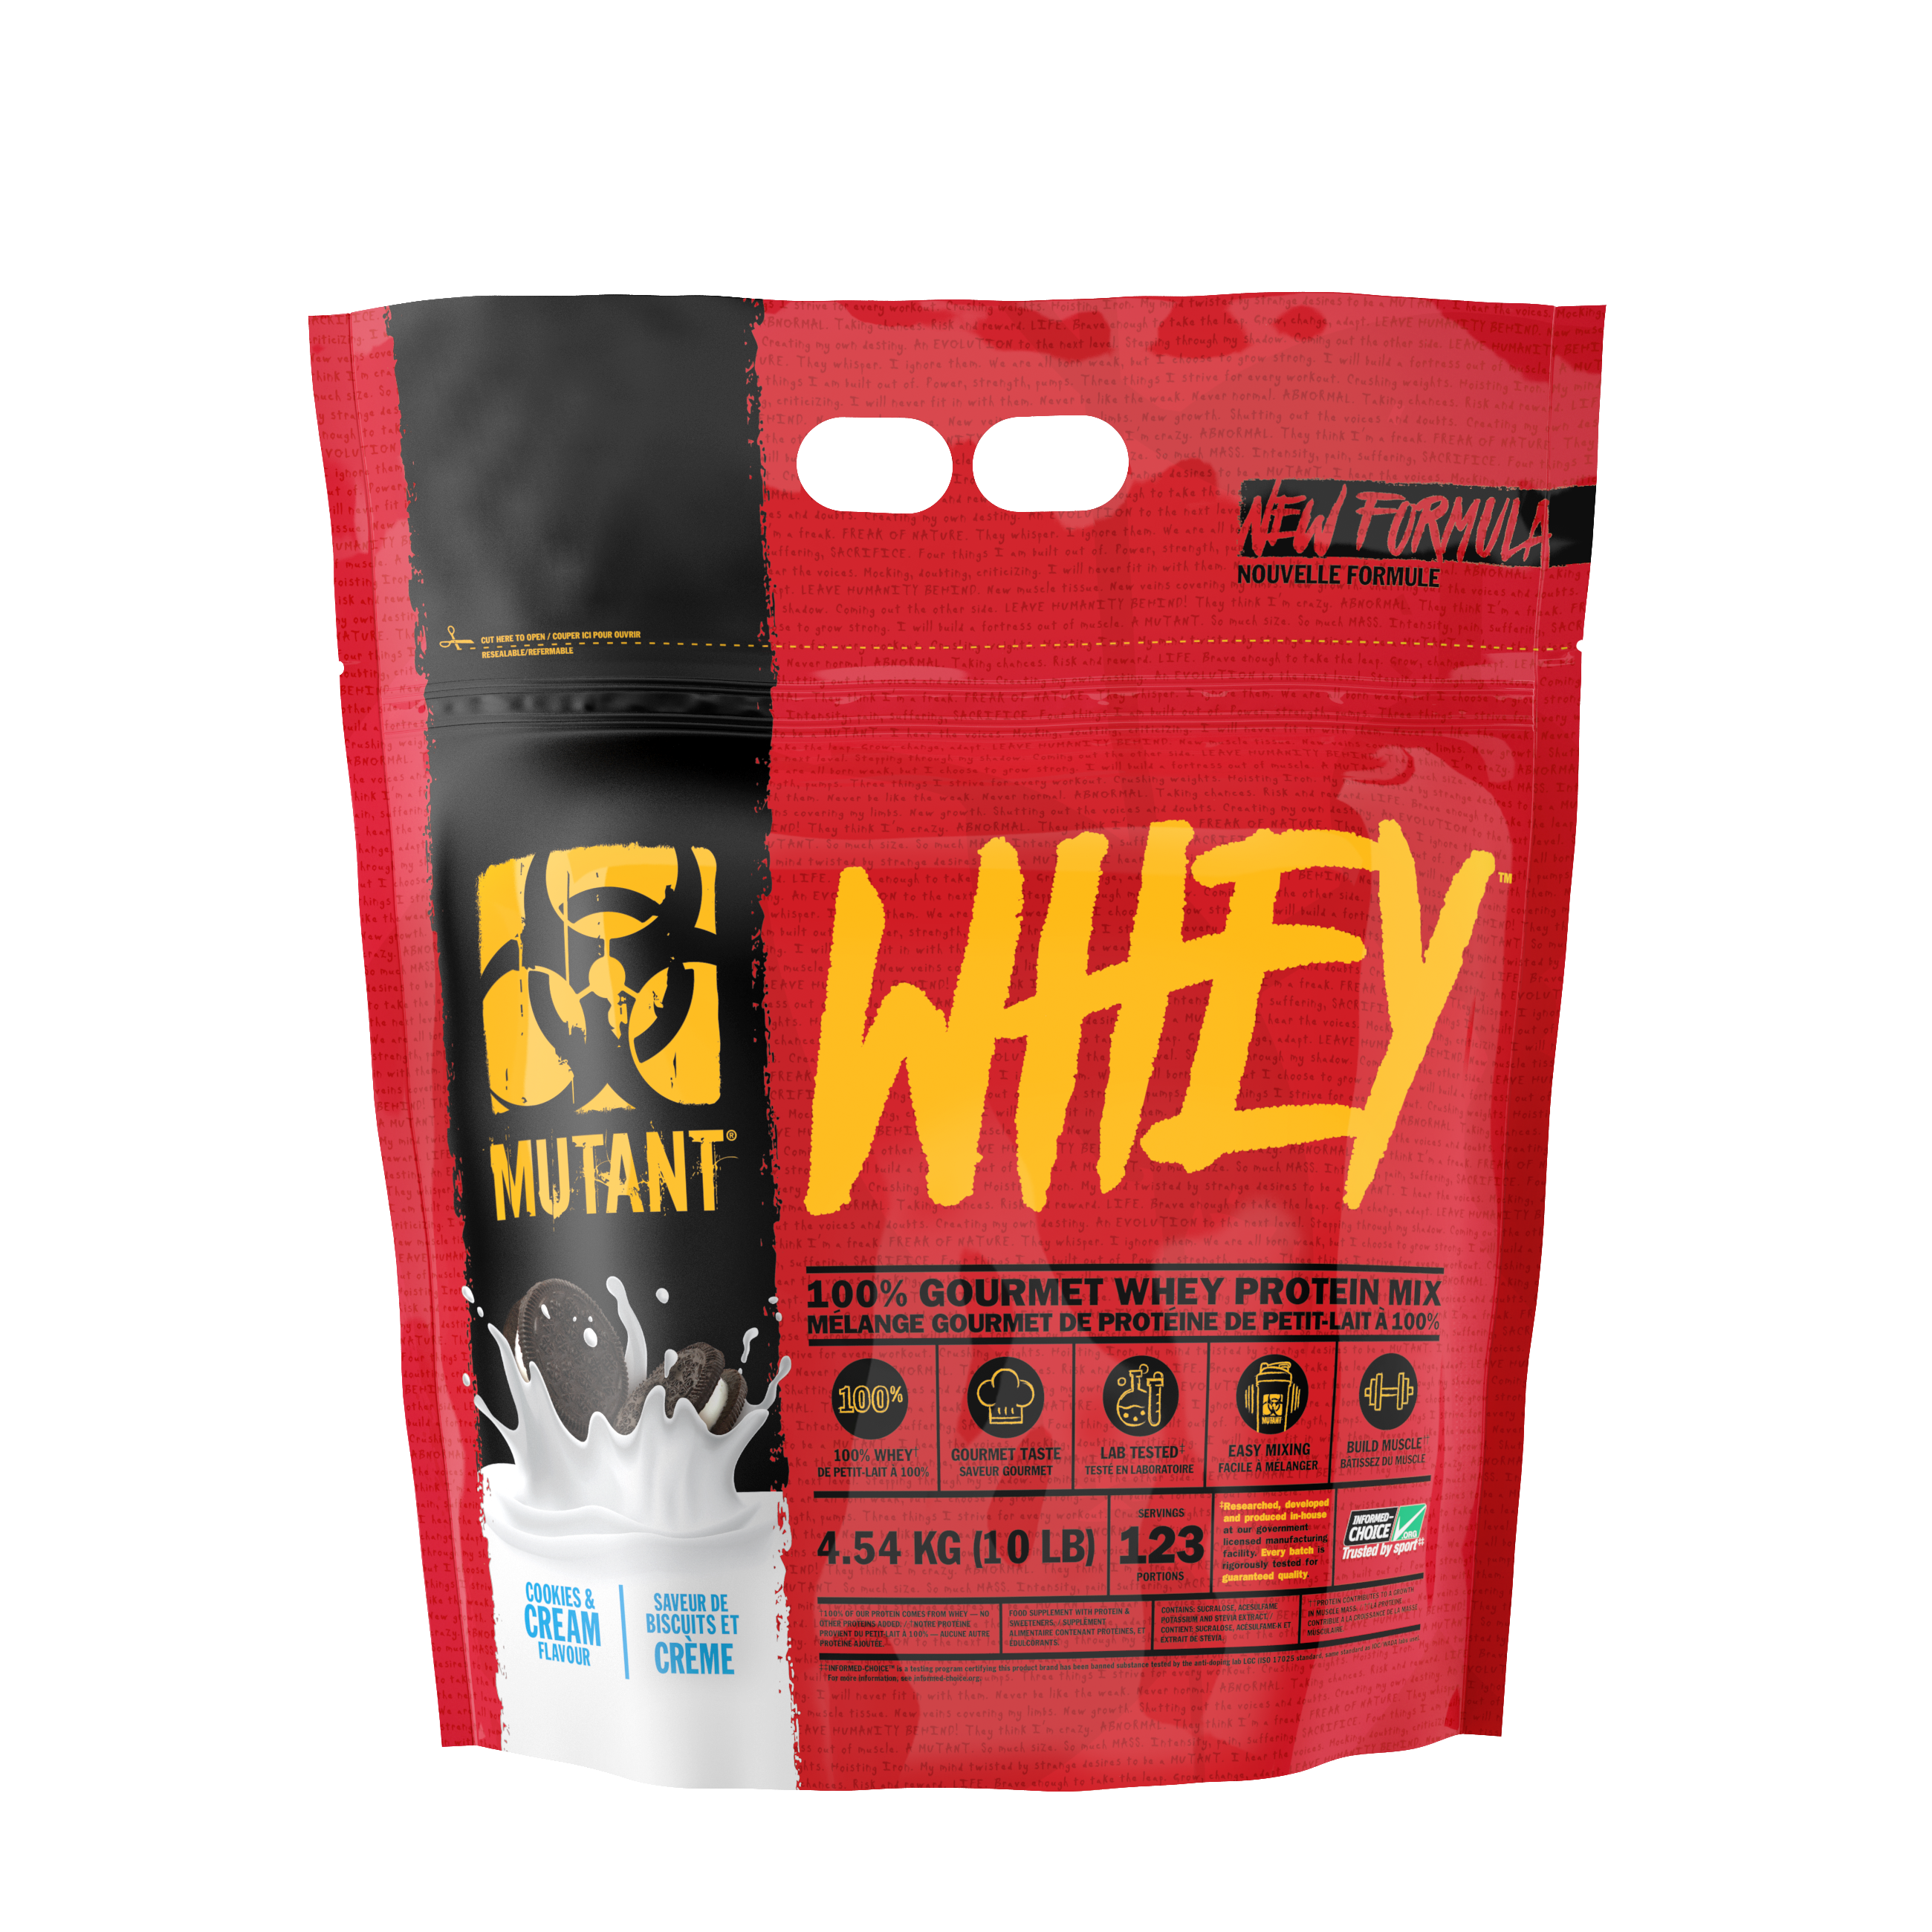 Mutant Whey (10 lbs) mutant-whey-10lbs Whey Protein Cookies and Cream Mutant